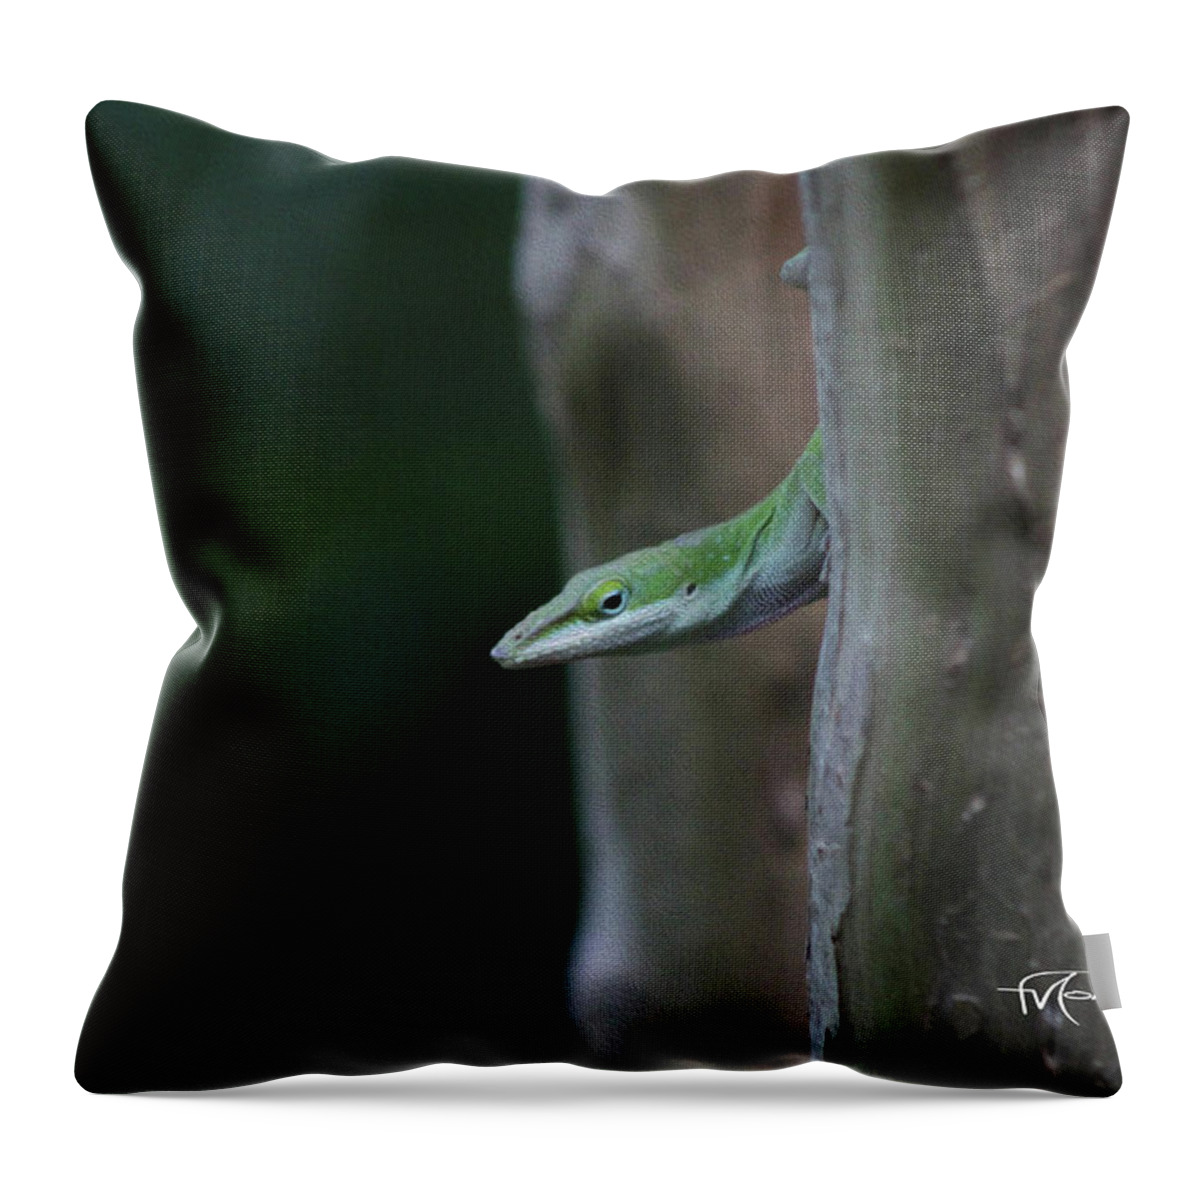 Wildlife Outdoor Images Throw Pillow featuring the photograph Lollygagging Lizard by Felipe Gomez